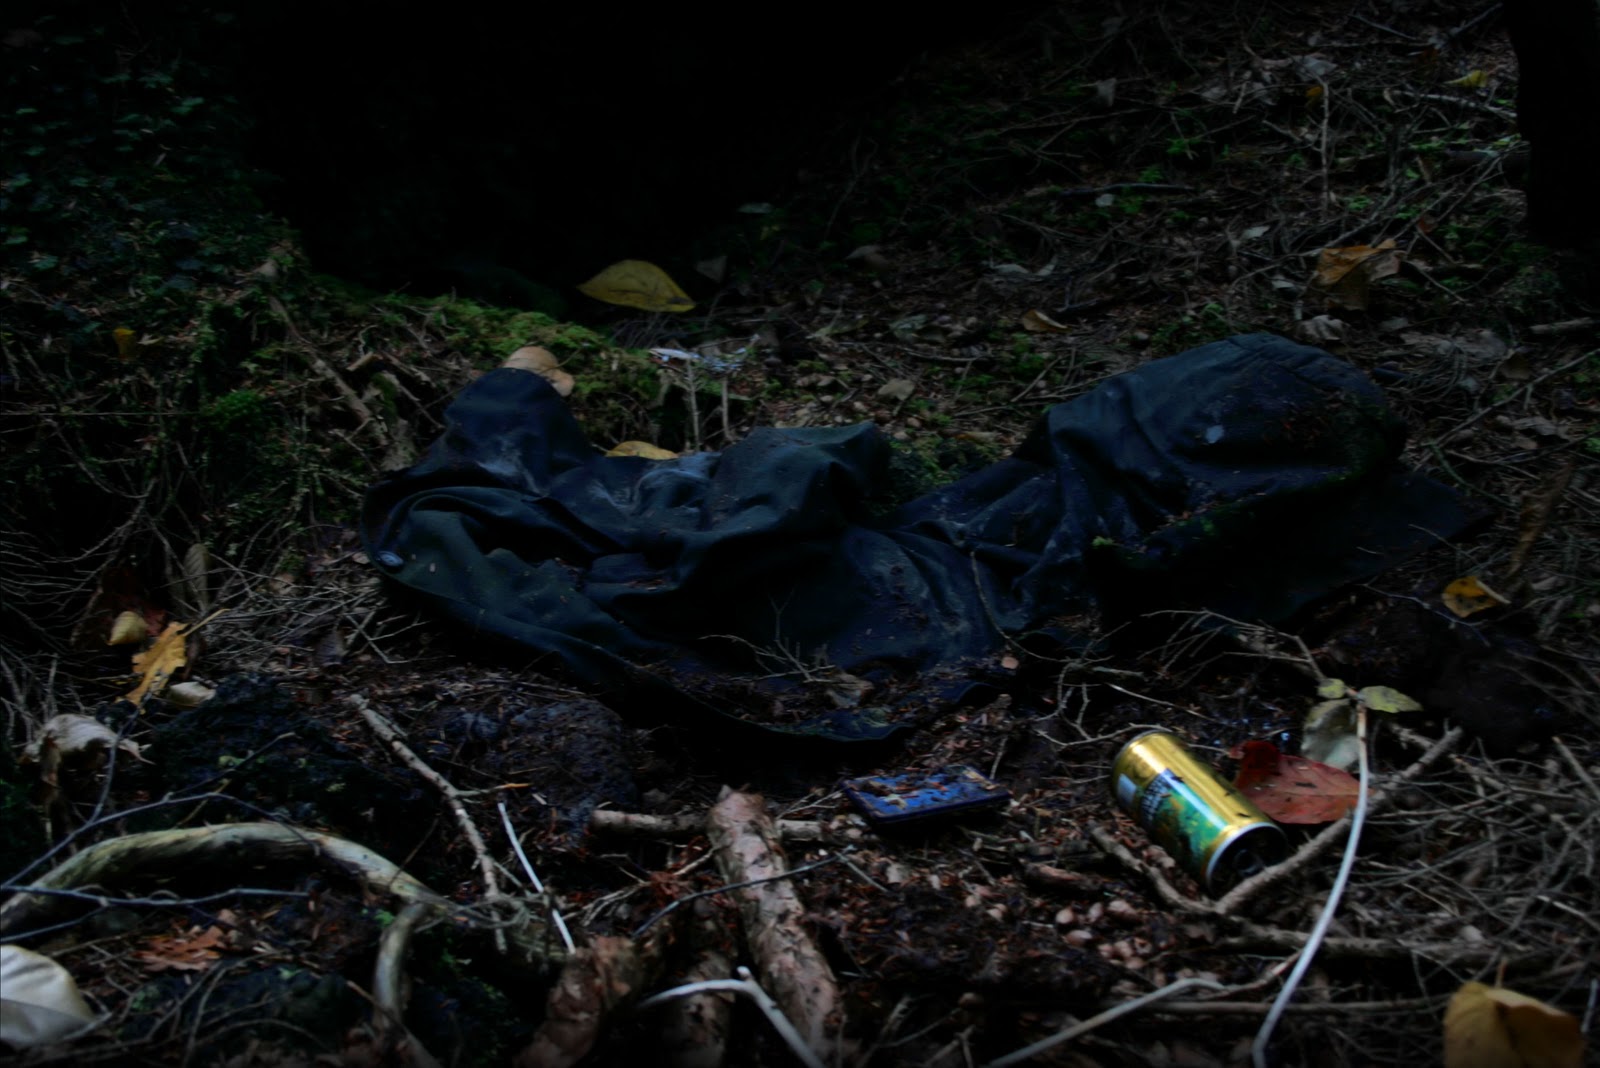 Daysleeper: Aokigahara Forest (Suicide Forest), Japan